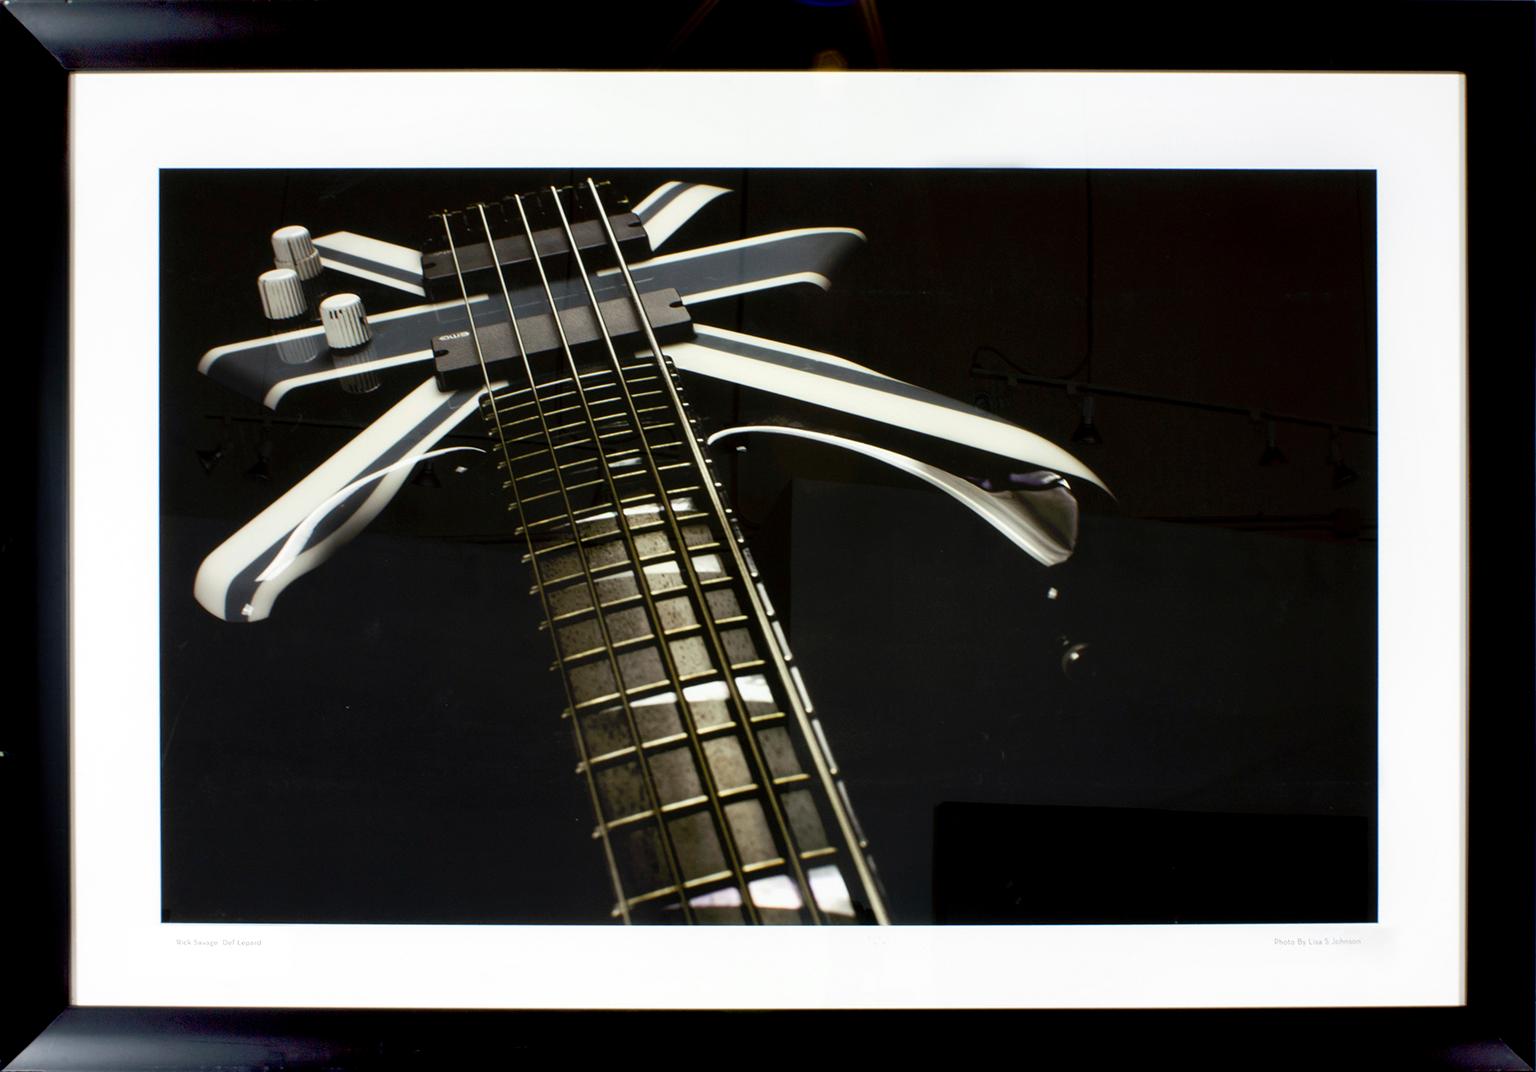 Original photo of a Rick Savage Def Leppard guitar taken by Lisa S. Johnson for her book, "108 Rock Star Guitars." "Rick Savage Def Lepard" printed on lower left front margin. "Photo by Lisa S. Johnson" printed on lower right front margin. This